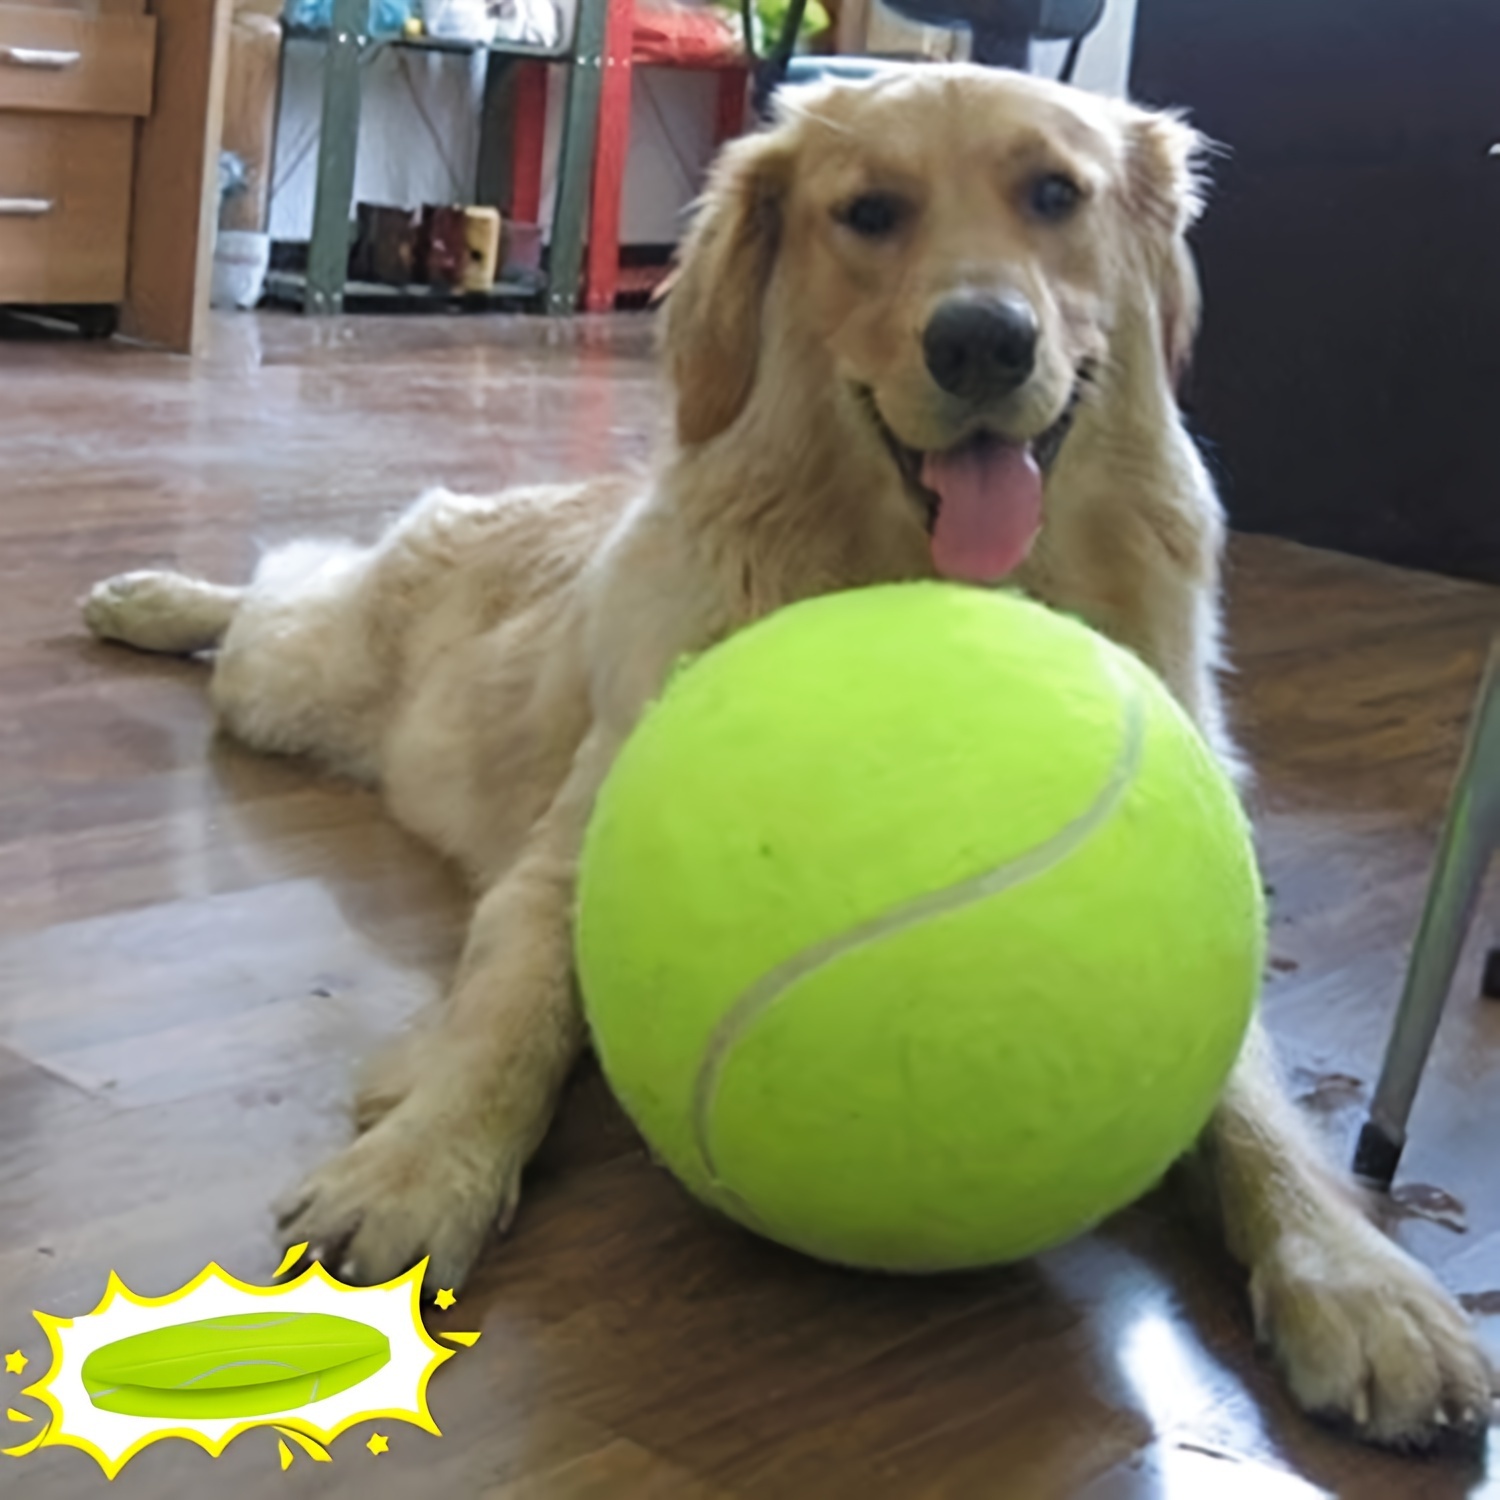 

1pc Interactive Tennis Ball Toy For Dogs - 24cm Fun-encouraging Playtime, Durable Training Aid For Small To Medium Breeds (shipped Deflated)